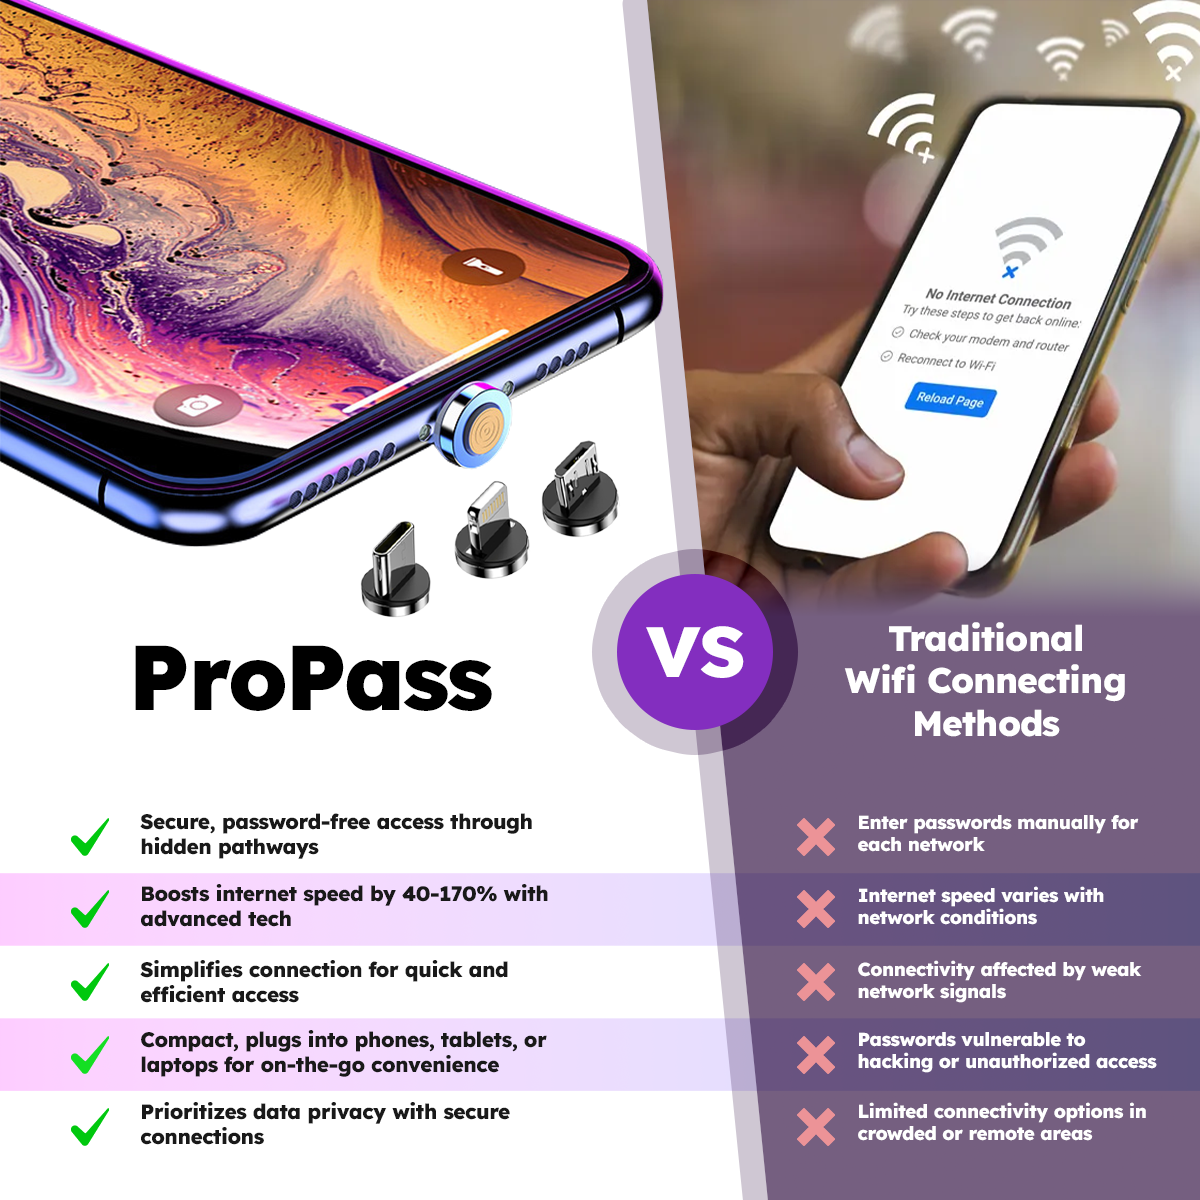 UnlockChannel™ ProPass WIFI Anywhere Wizard - Limited Time Sale!